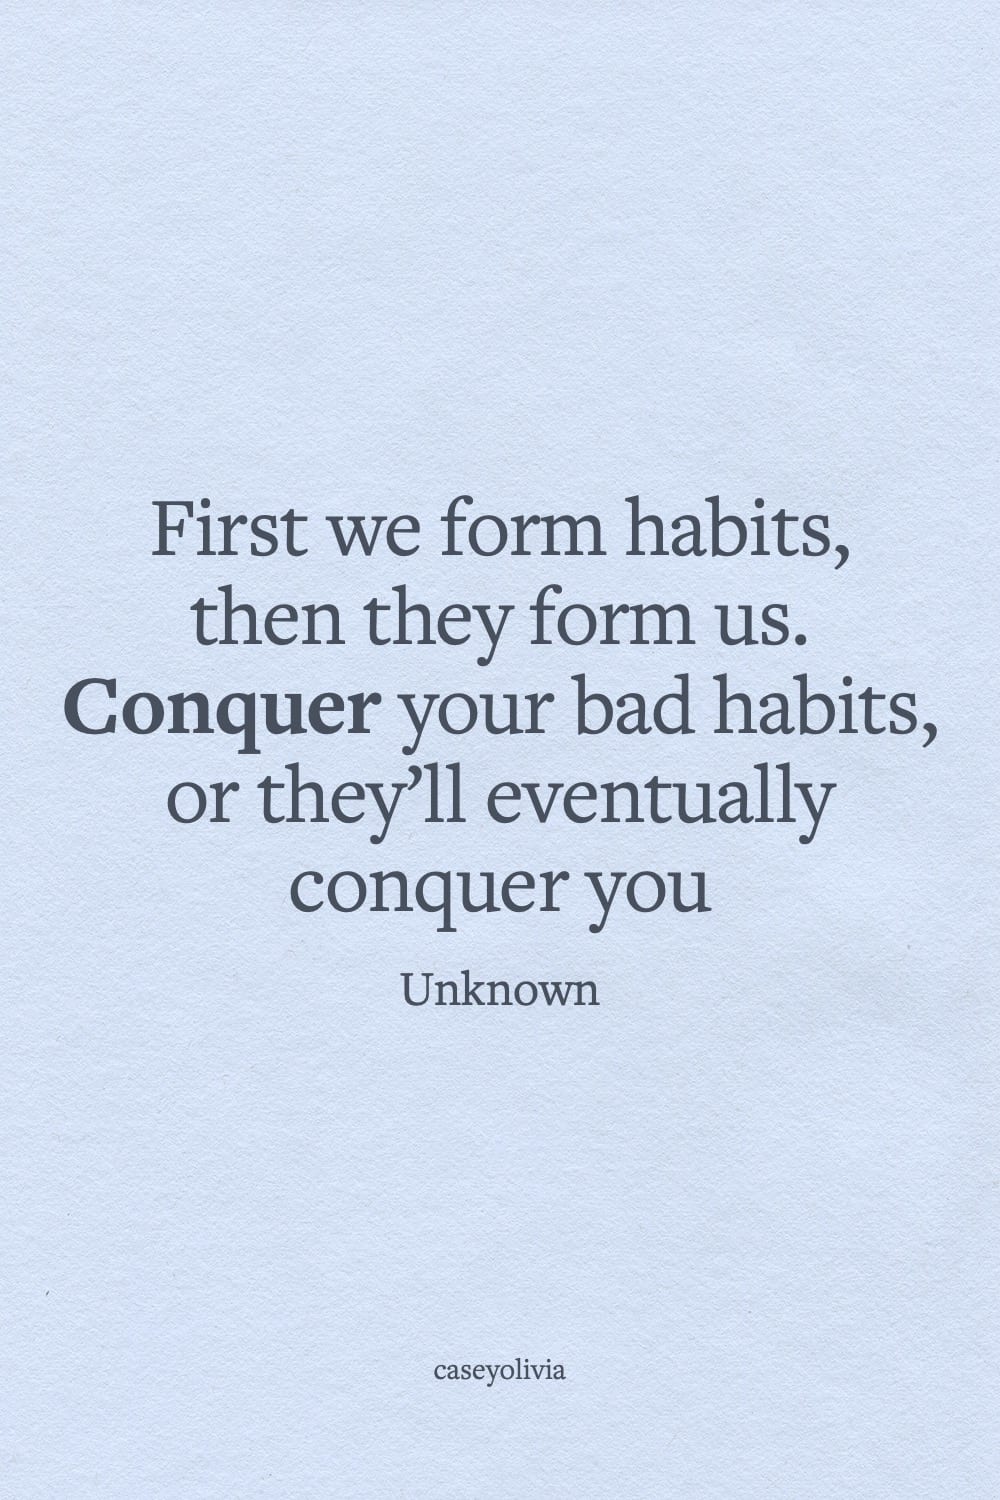 conquer your bad habits quote for motivation